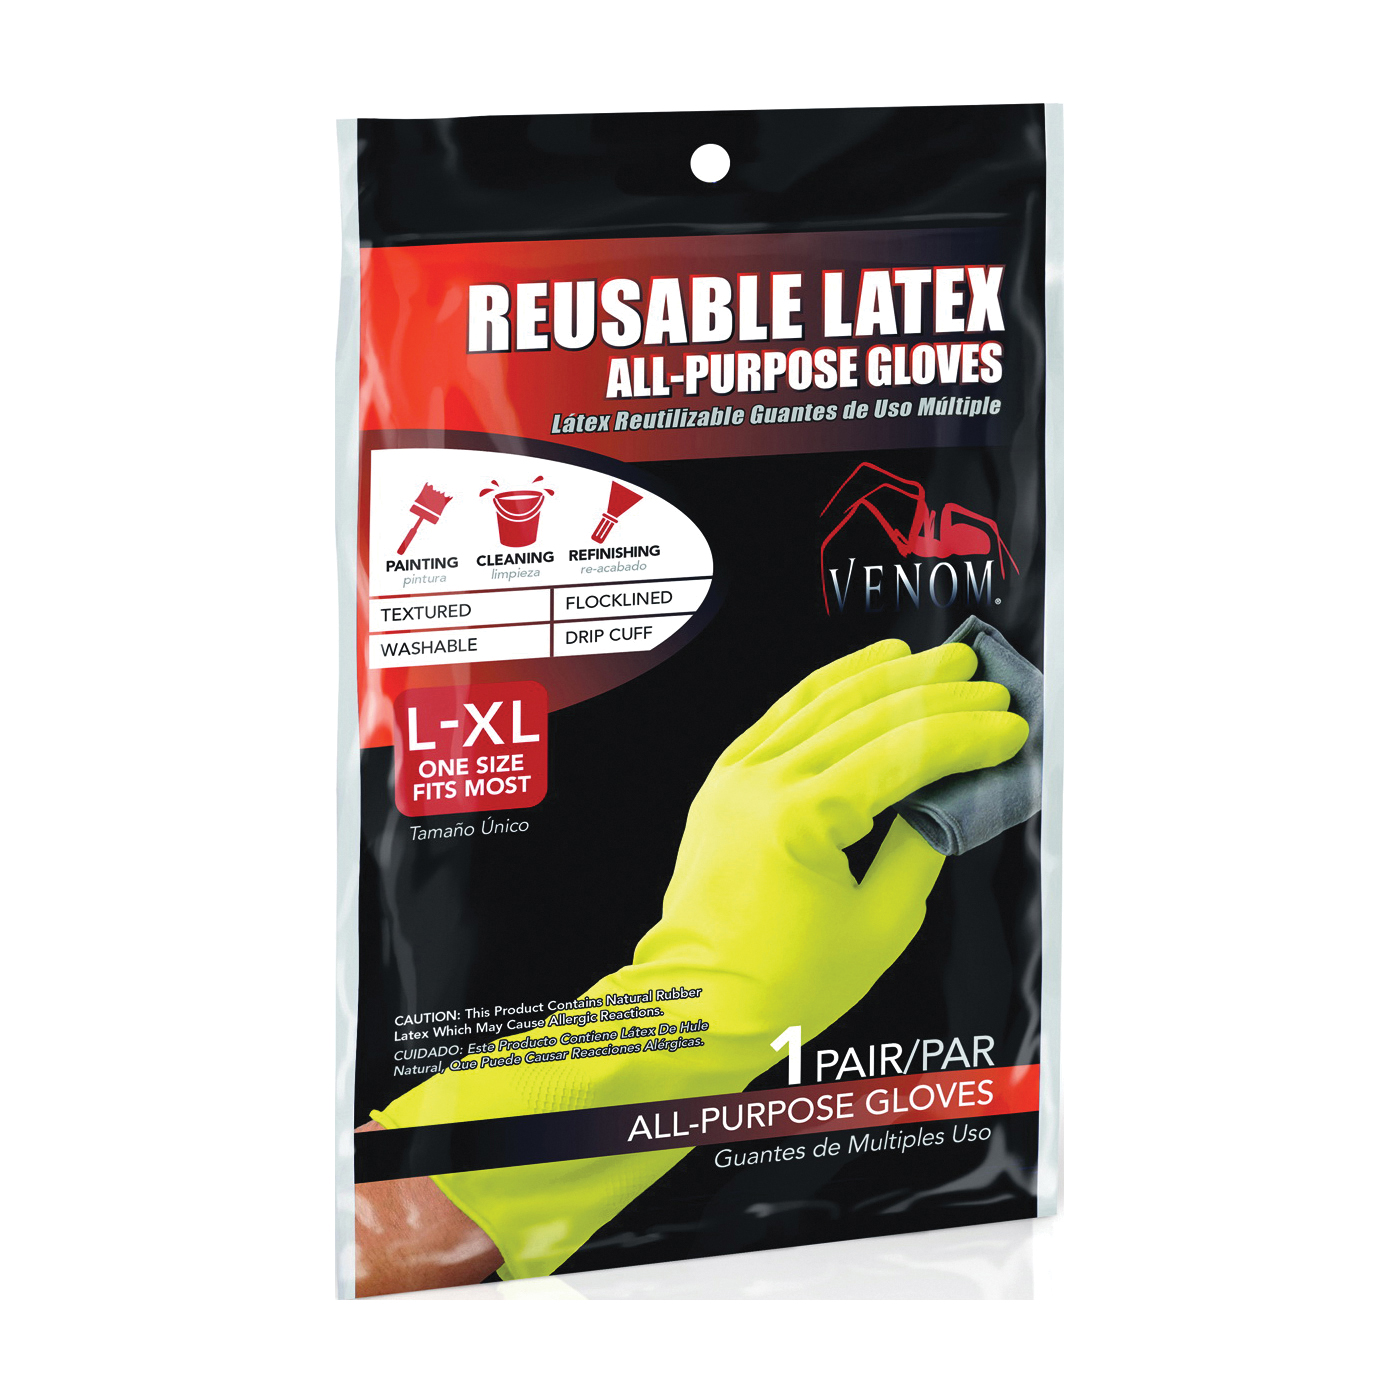 VEN9125 Reusable Gloves, L/XL, 9 in L, Latex, Green